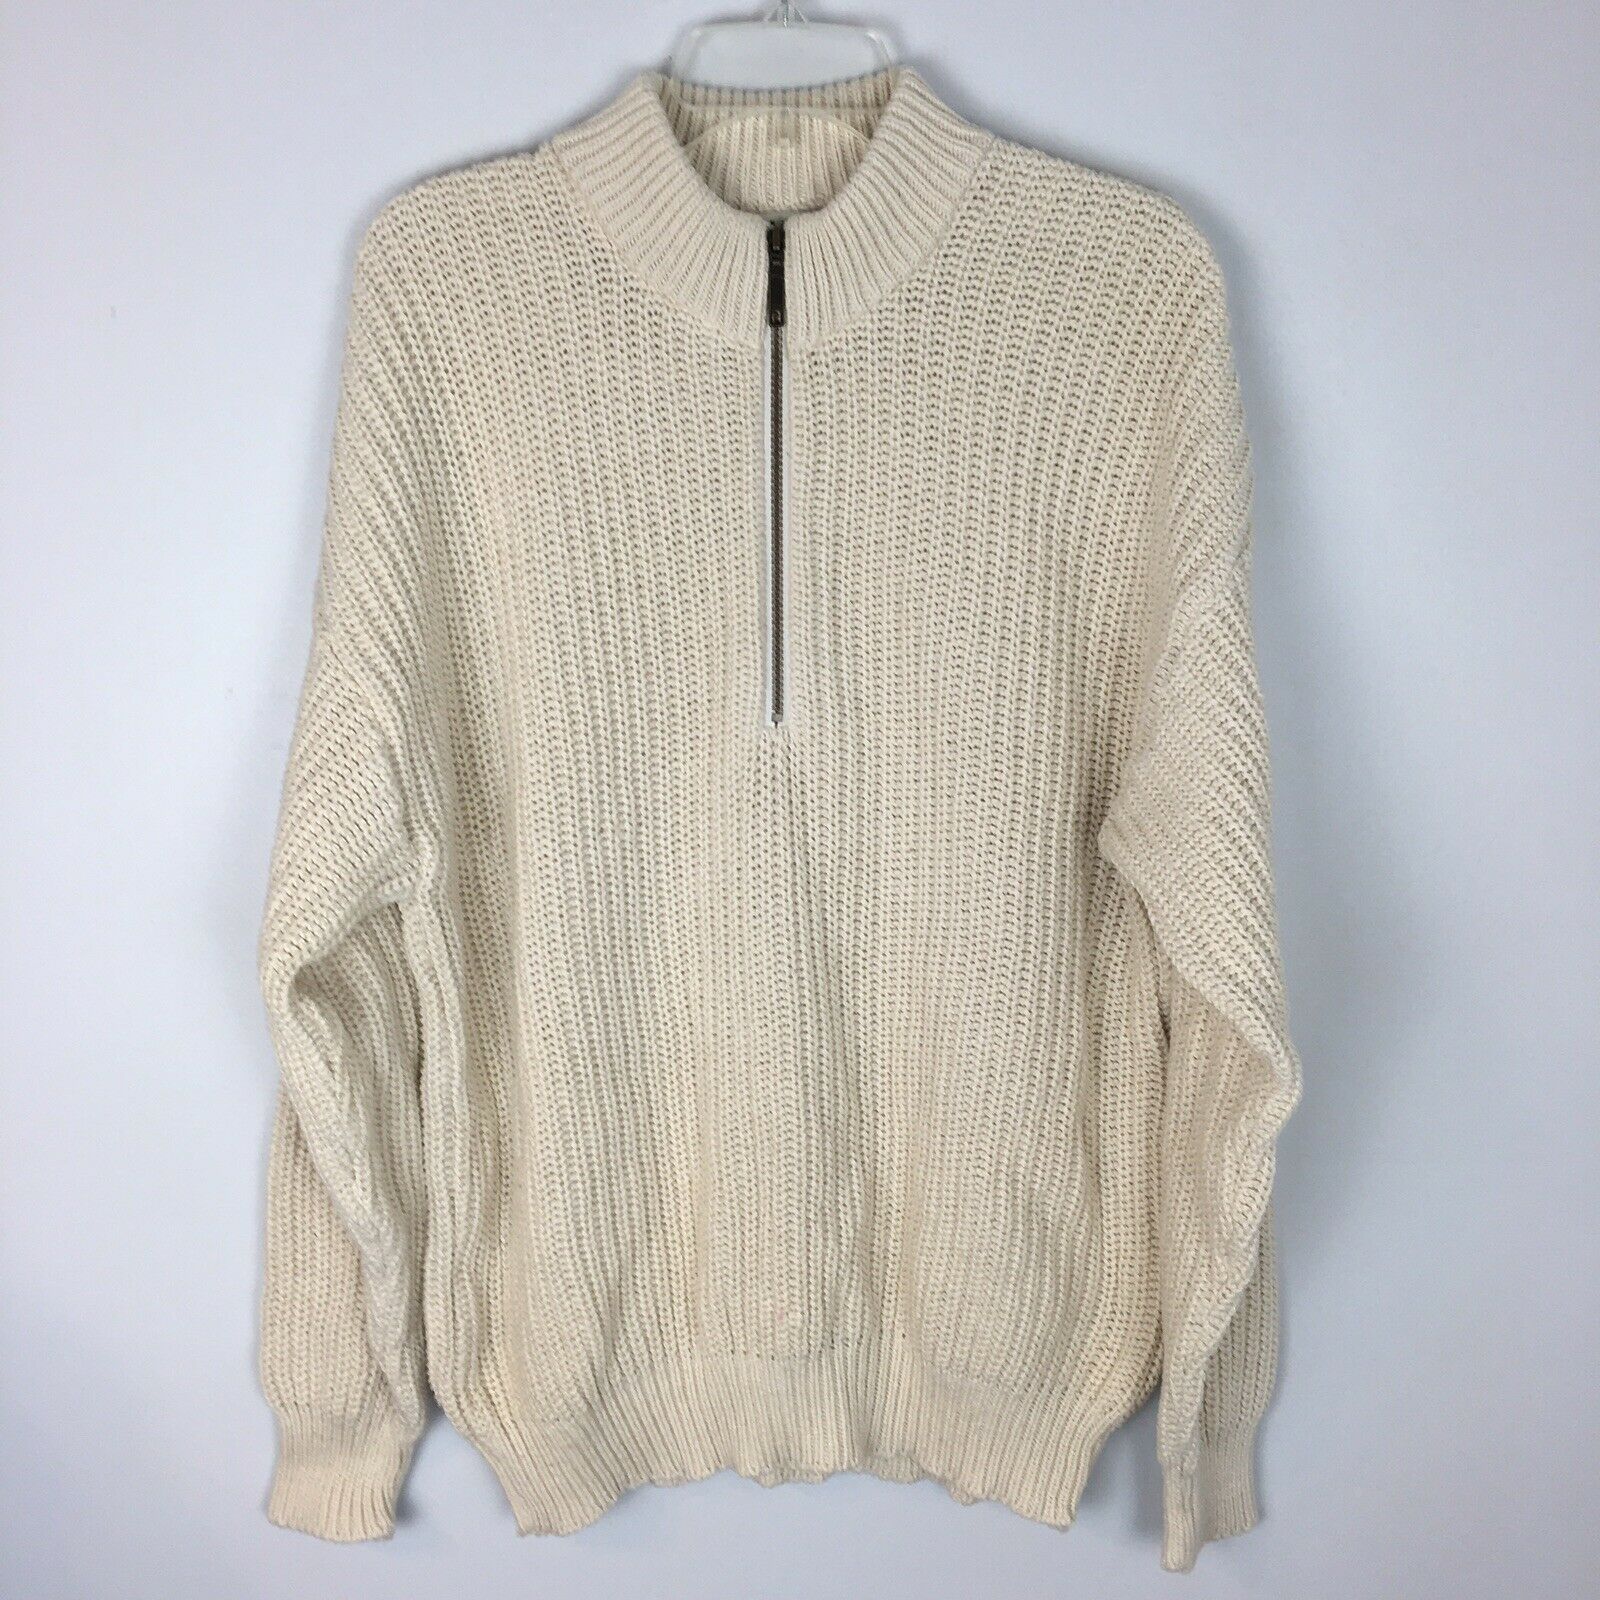 Orvis Men's Cream Half Zip Thick Ivory Cable Knit Sweater Size Large ...